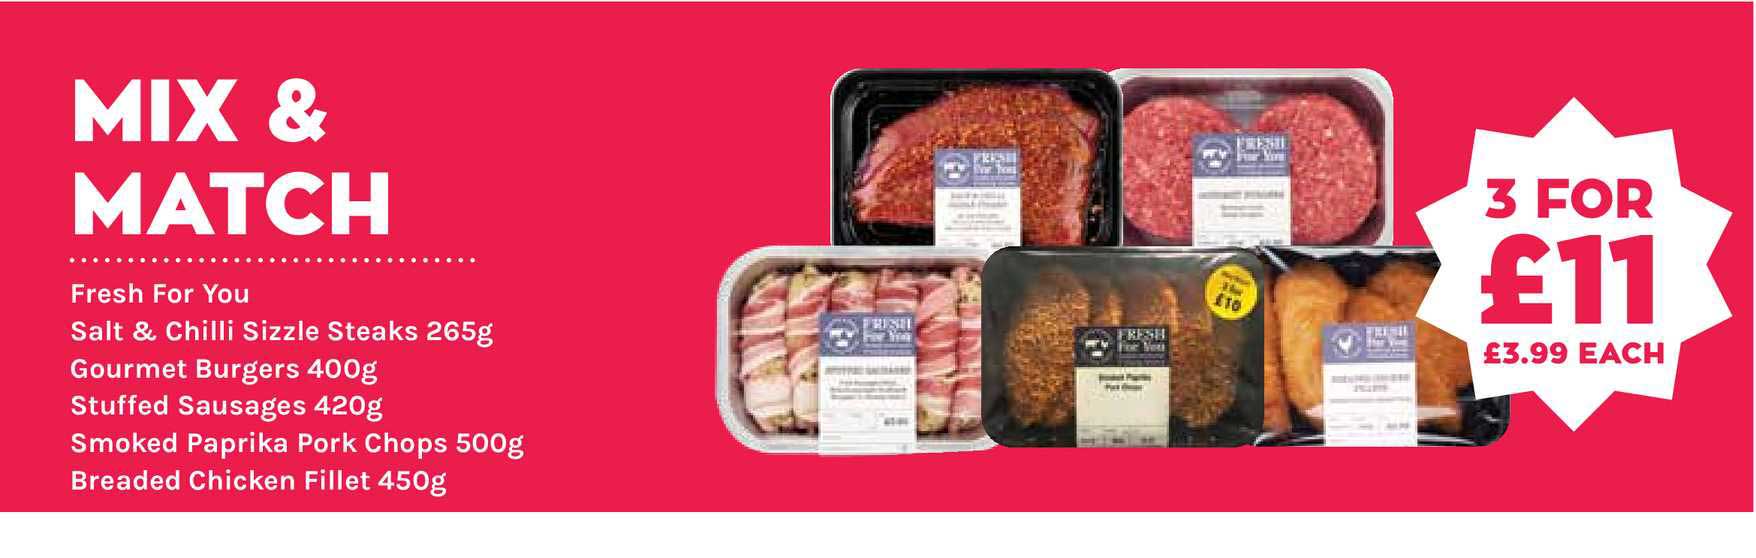 Mace Fresh For You Salt & Chilli Sizzle Steaks, Gourmet Burgers, Stuffed Sausages, Smoked Paprika Pork Chops, Breaded Chicken Fillet